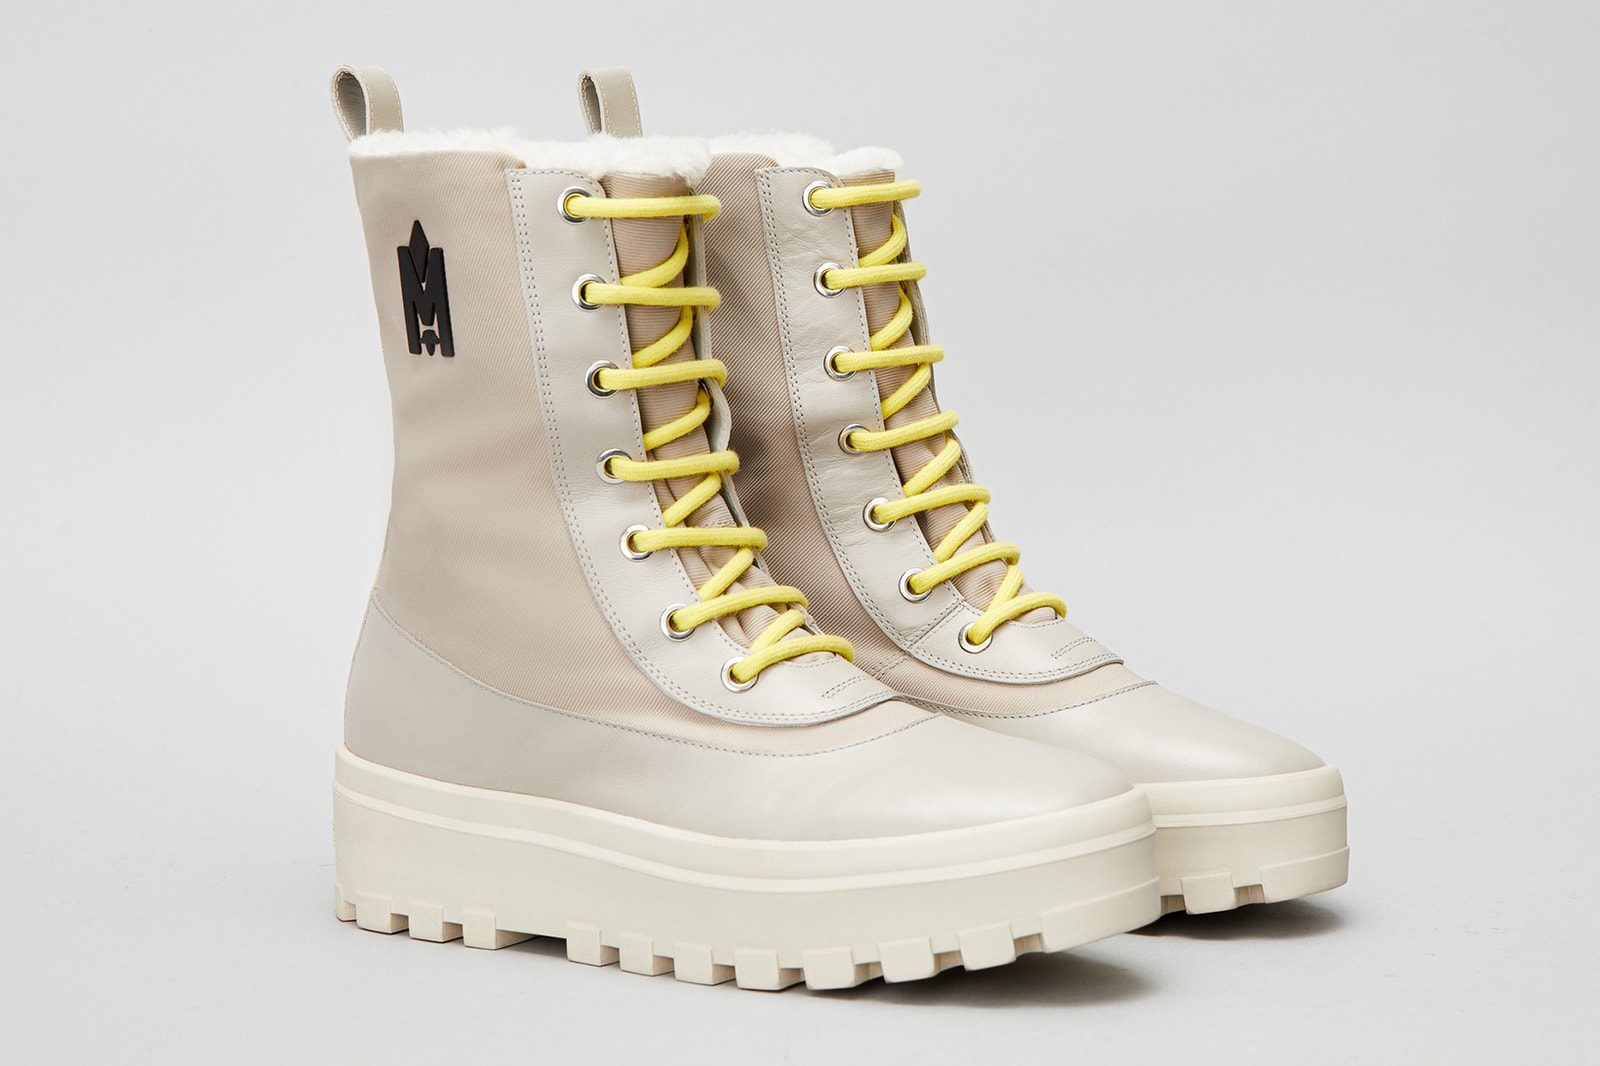 Mackage Launches Cold Weather Boots for Winter | HYPEBAE